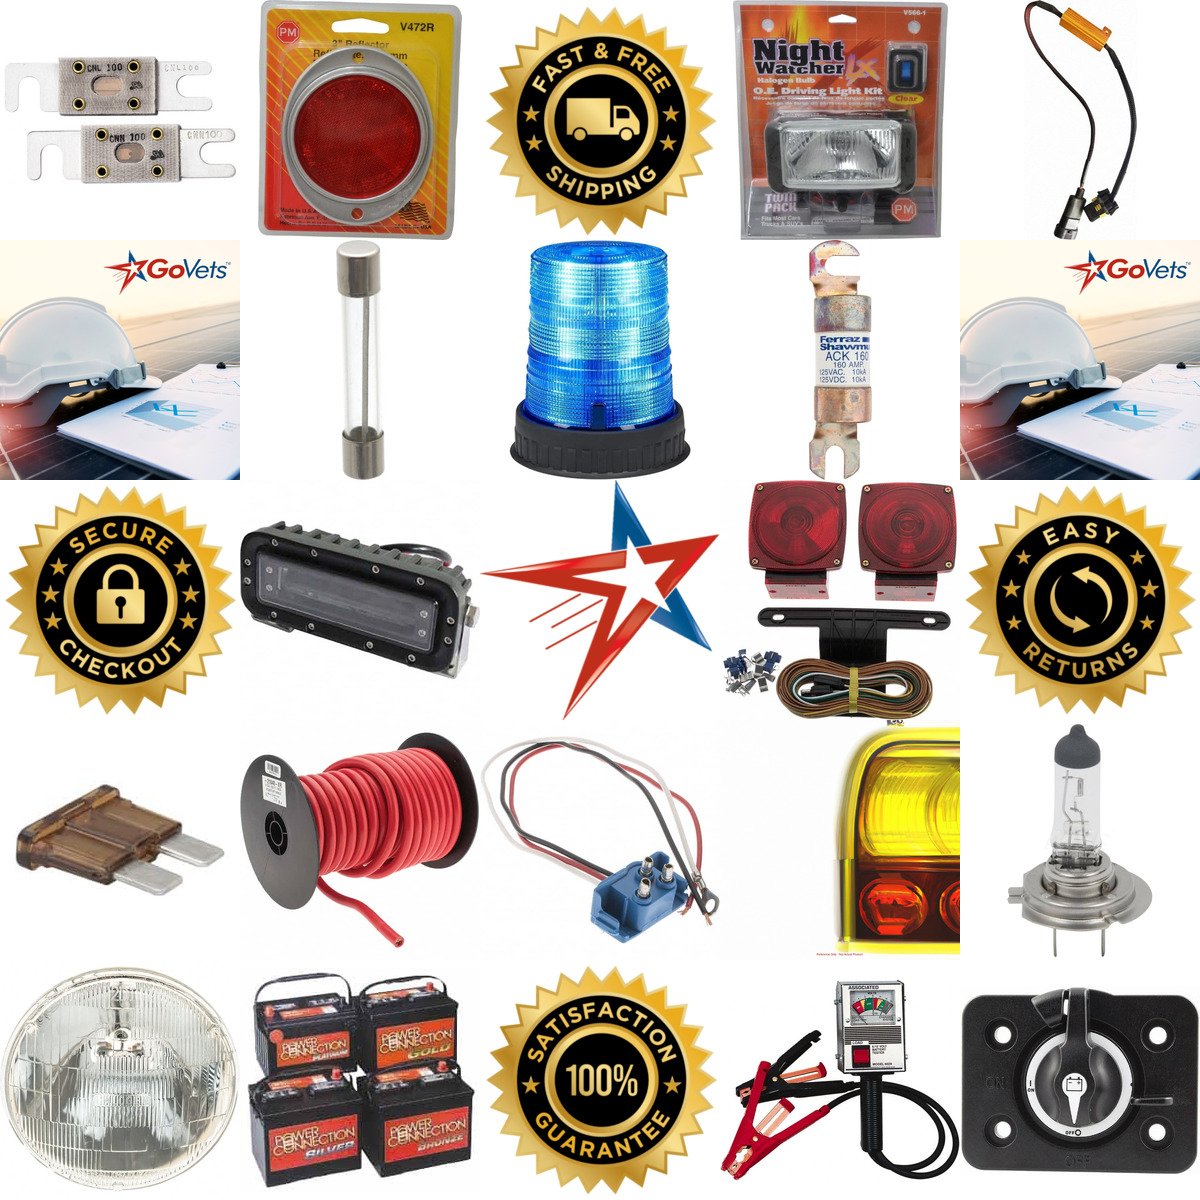 A selection of Automotive Electrical and Lighting products on GoVets